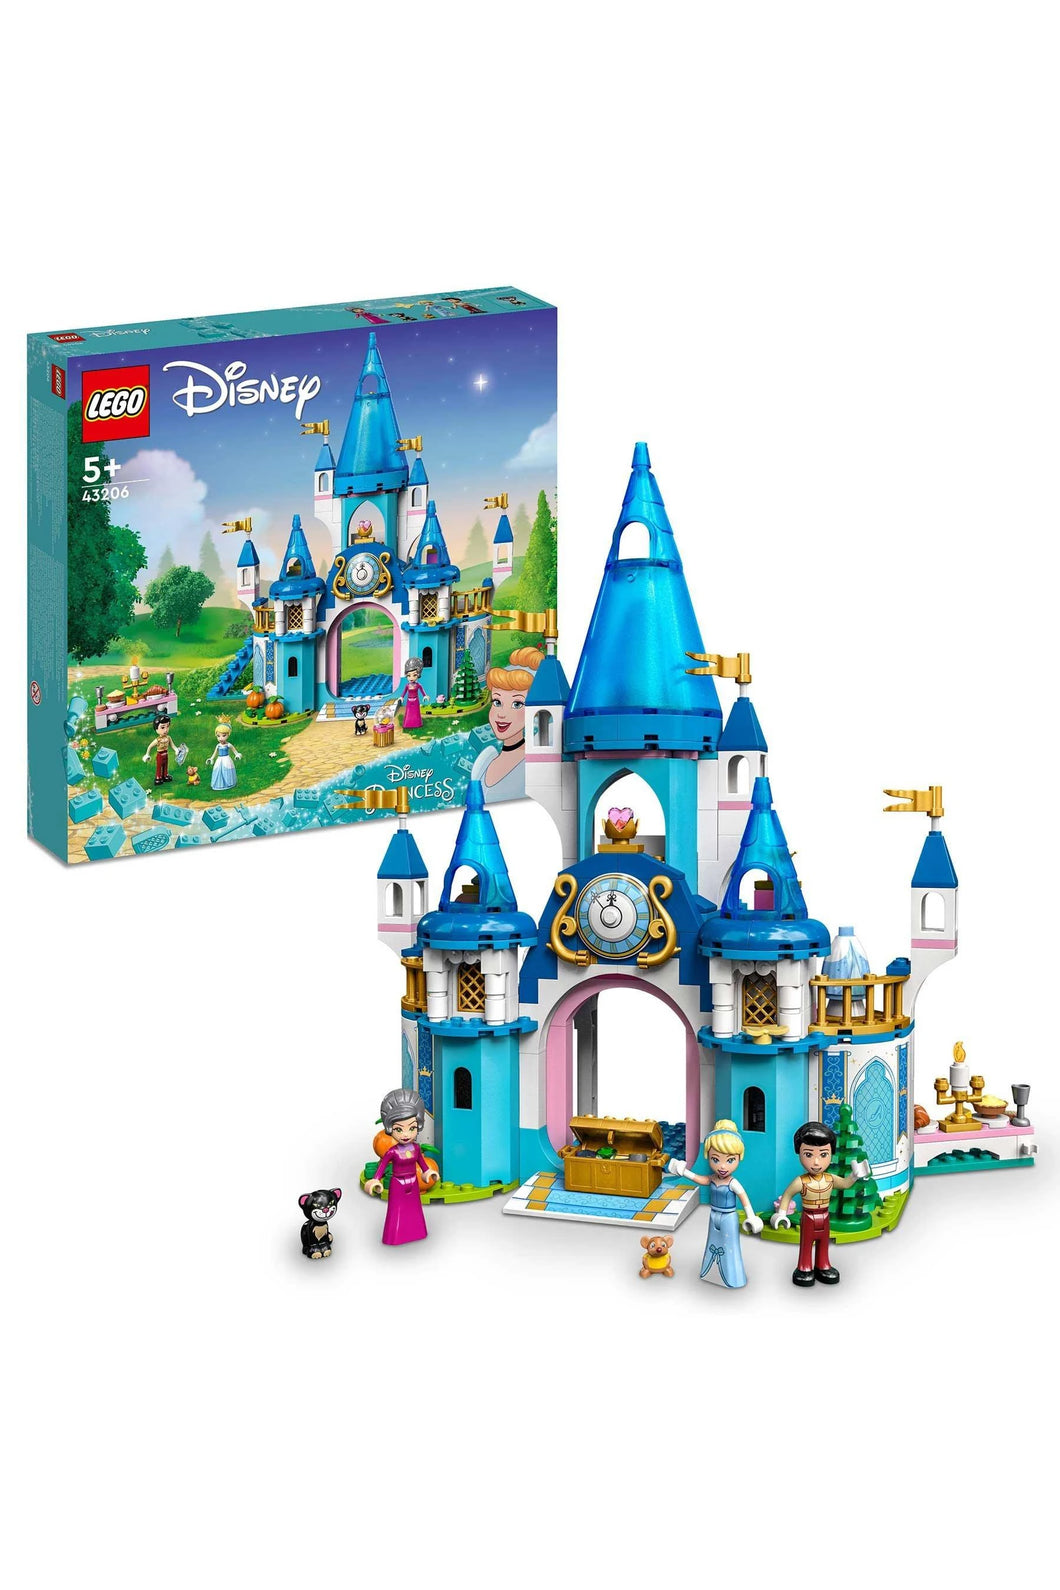 LEGO Disney Cinderella and Prince Charming Castle 43206 Building Toy Set (Retired Soon)